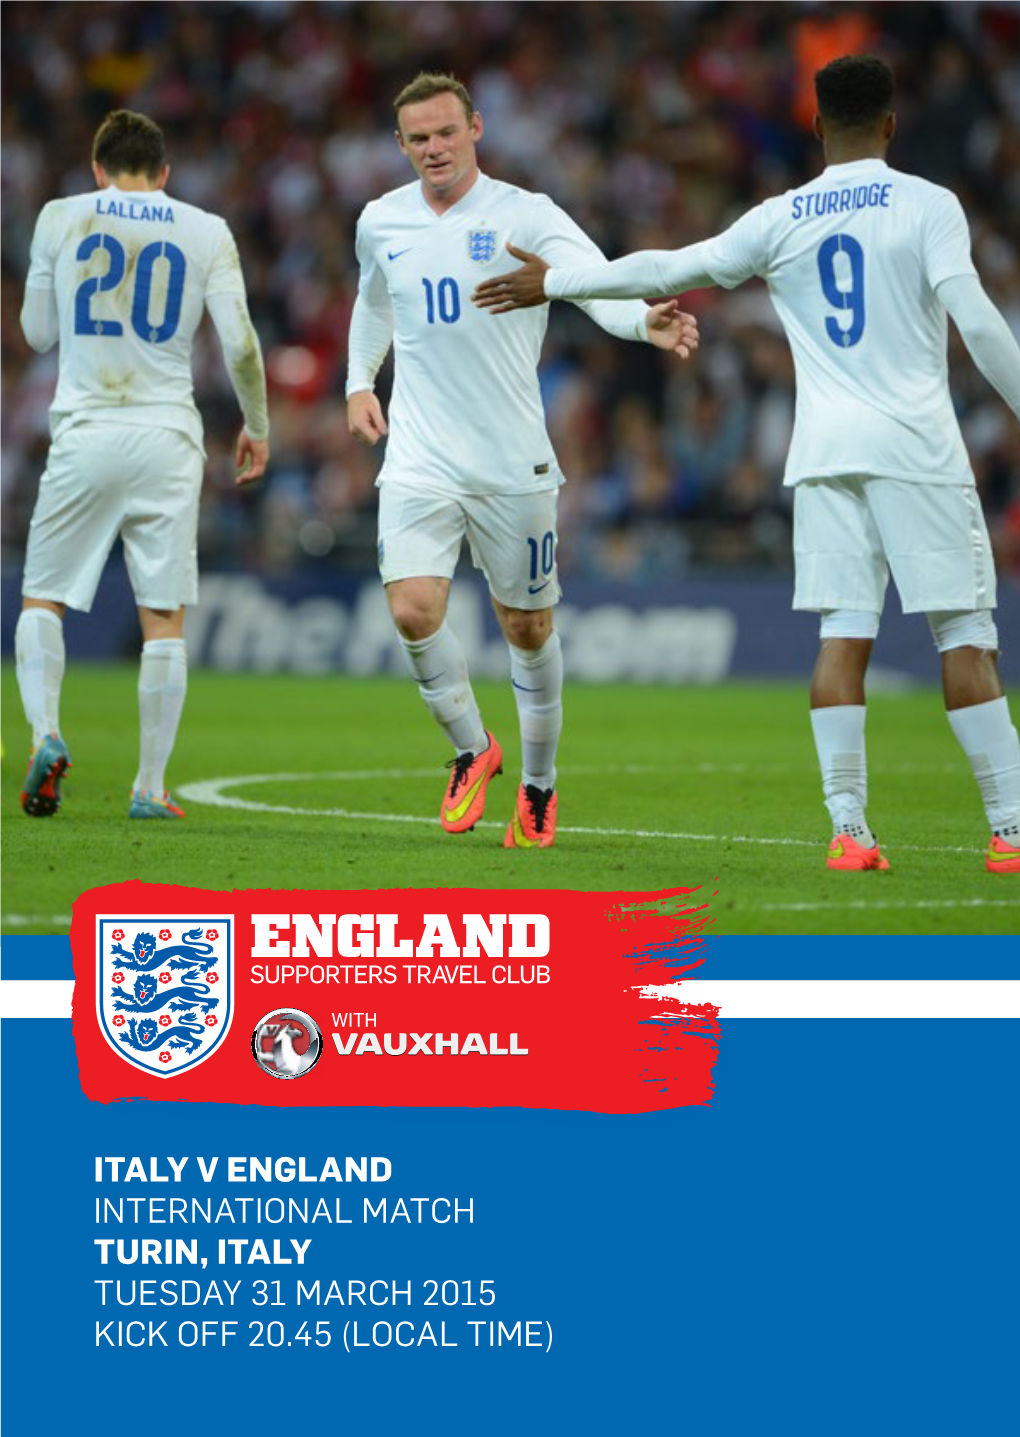 ITALY V ENGLAND INTERNATIONAL MATCH TURIN, ITALY TUESDAY 31 MARCH 2015 Kick Off 20.45 (Local Time)